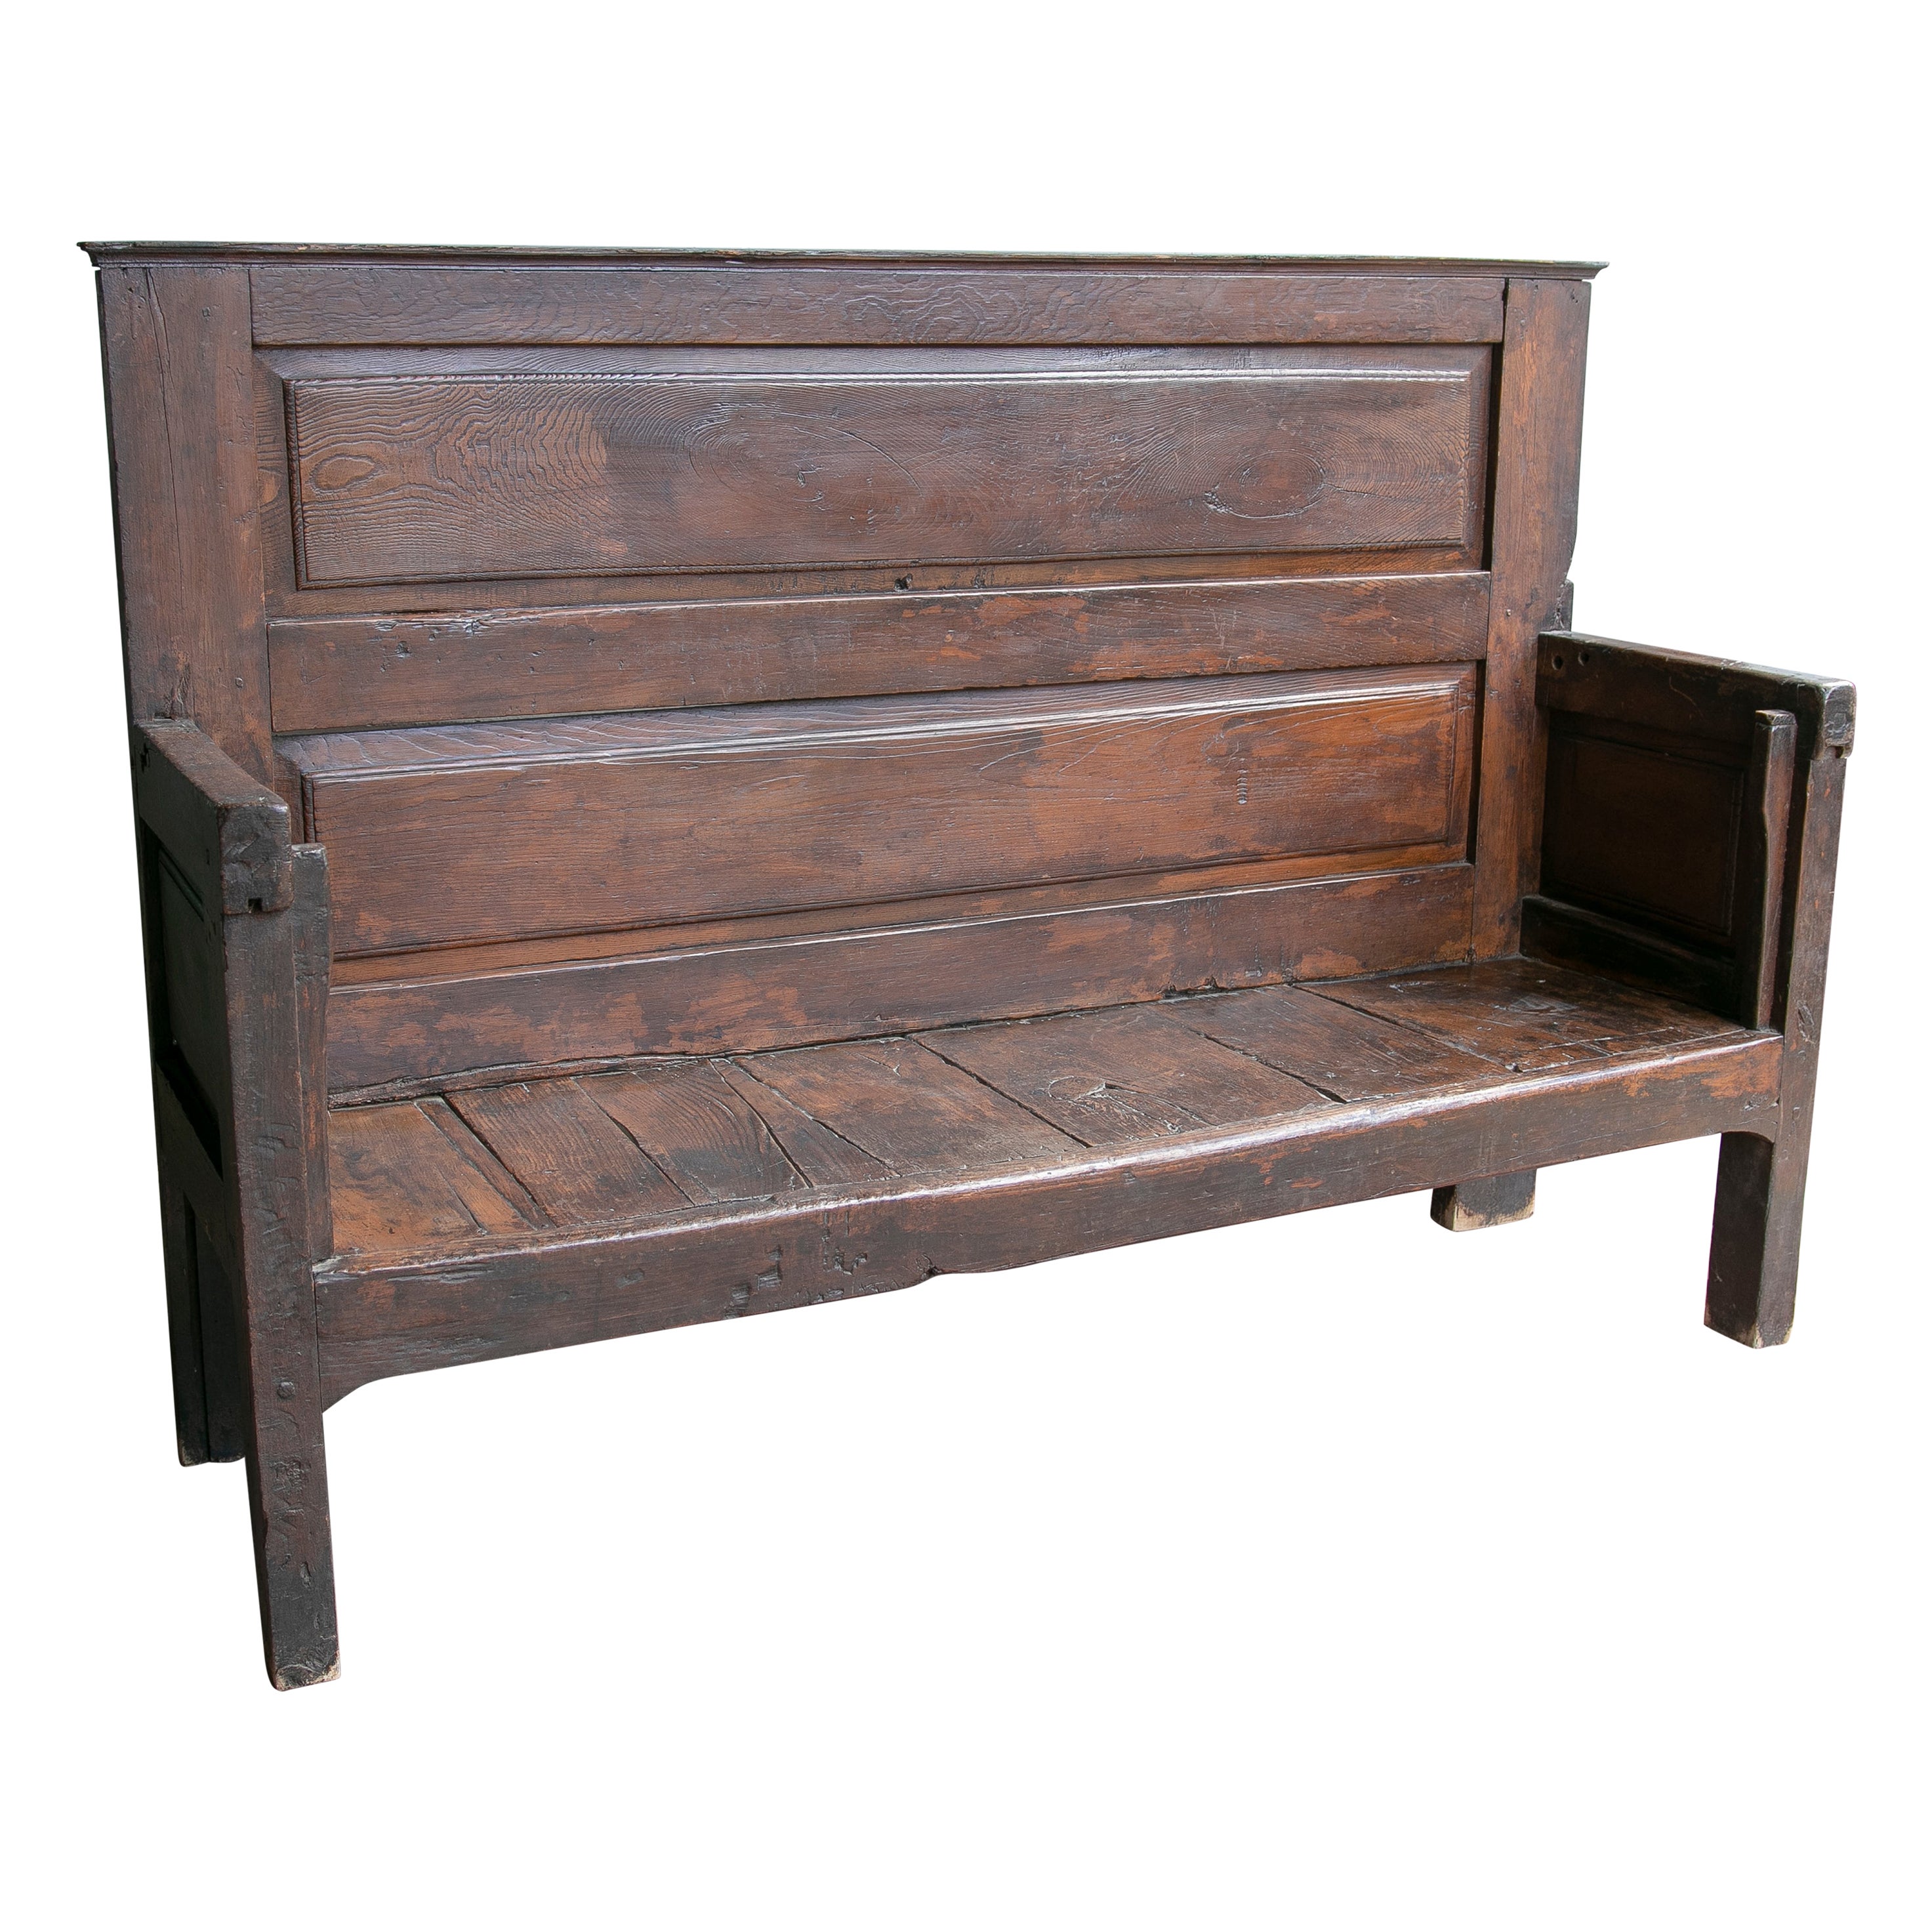 19th Century Rustic Hand Carved Wooden Bench